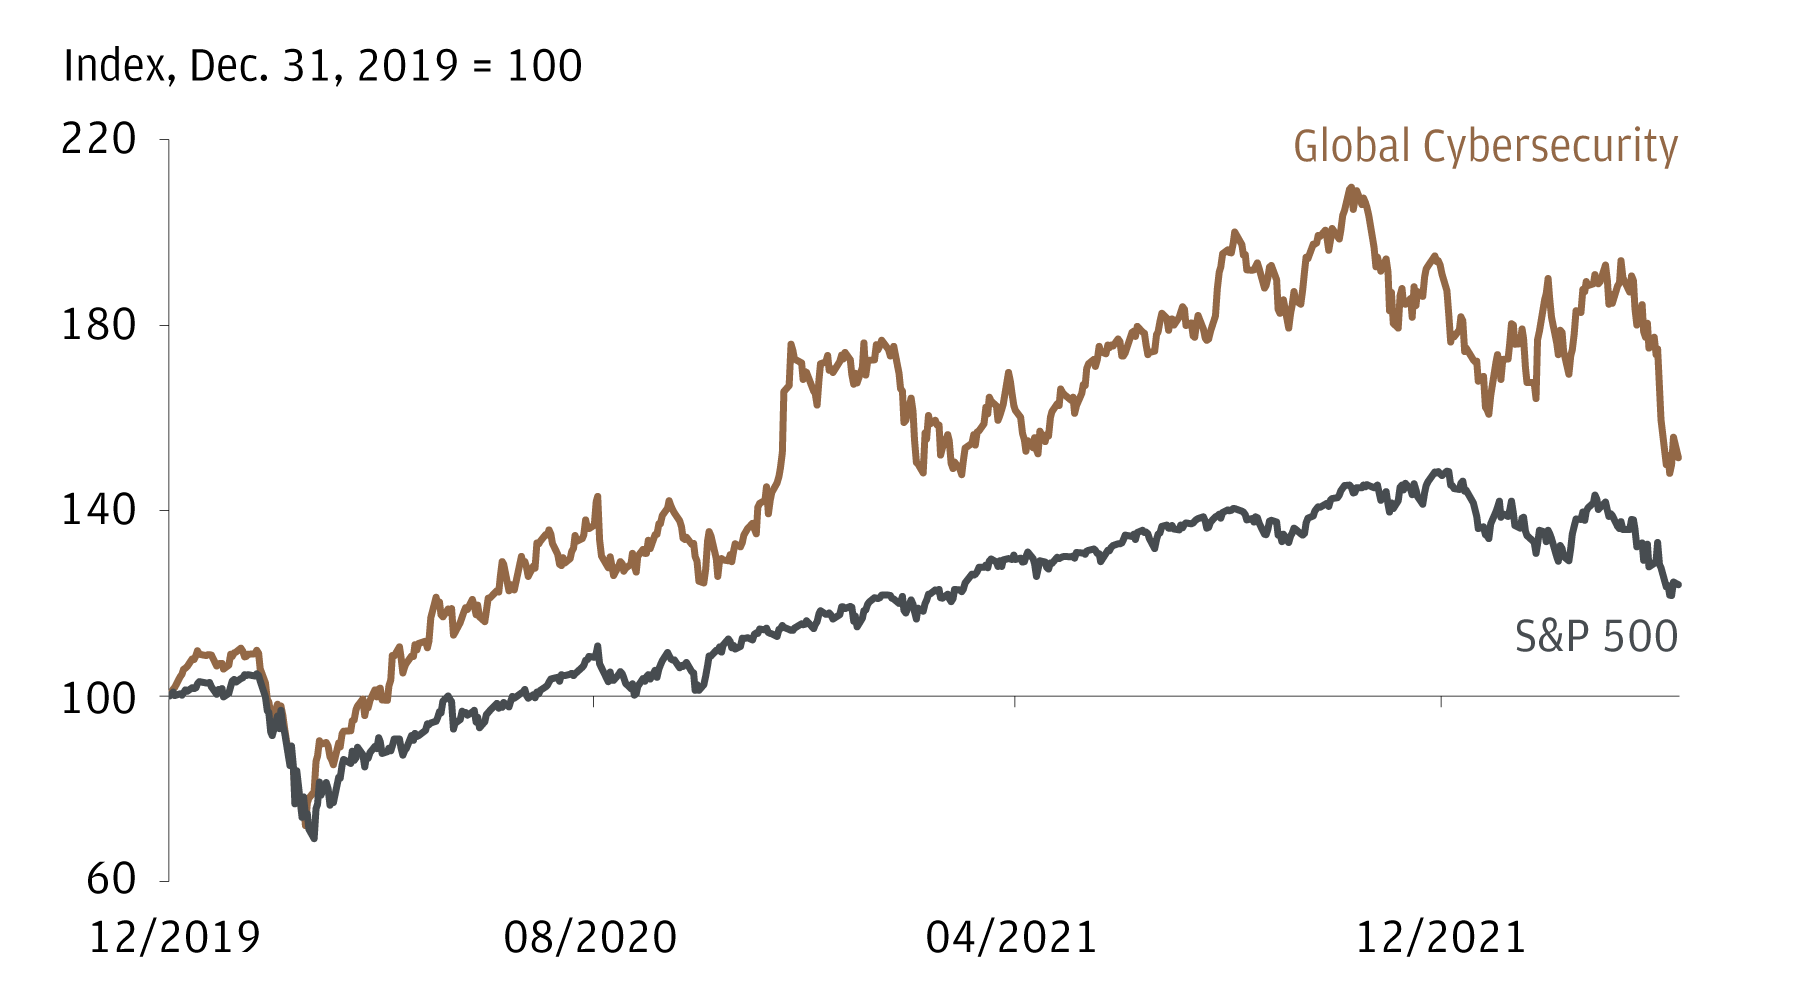 Chart 2: This chart tracks the global cybersecurity index against the S&P 500 from 2020 to 2022. Its shows the correlation between the two in terms of growth.